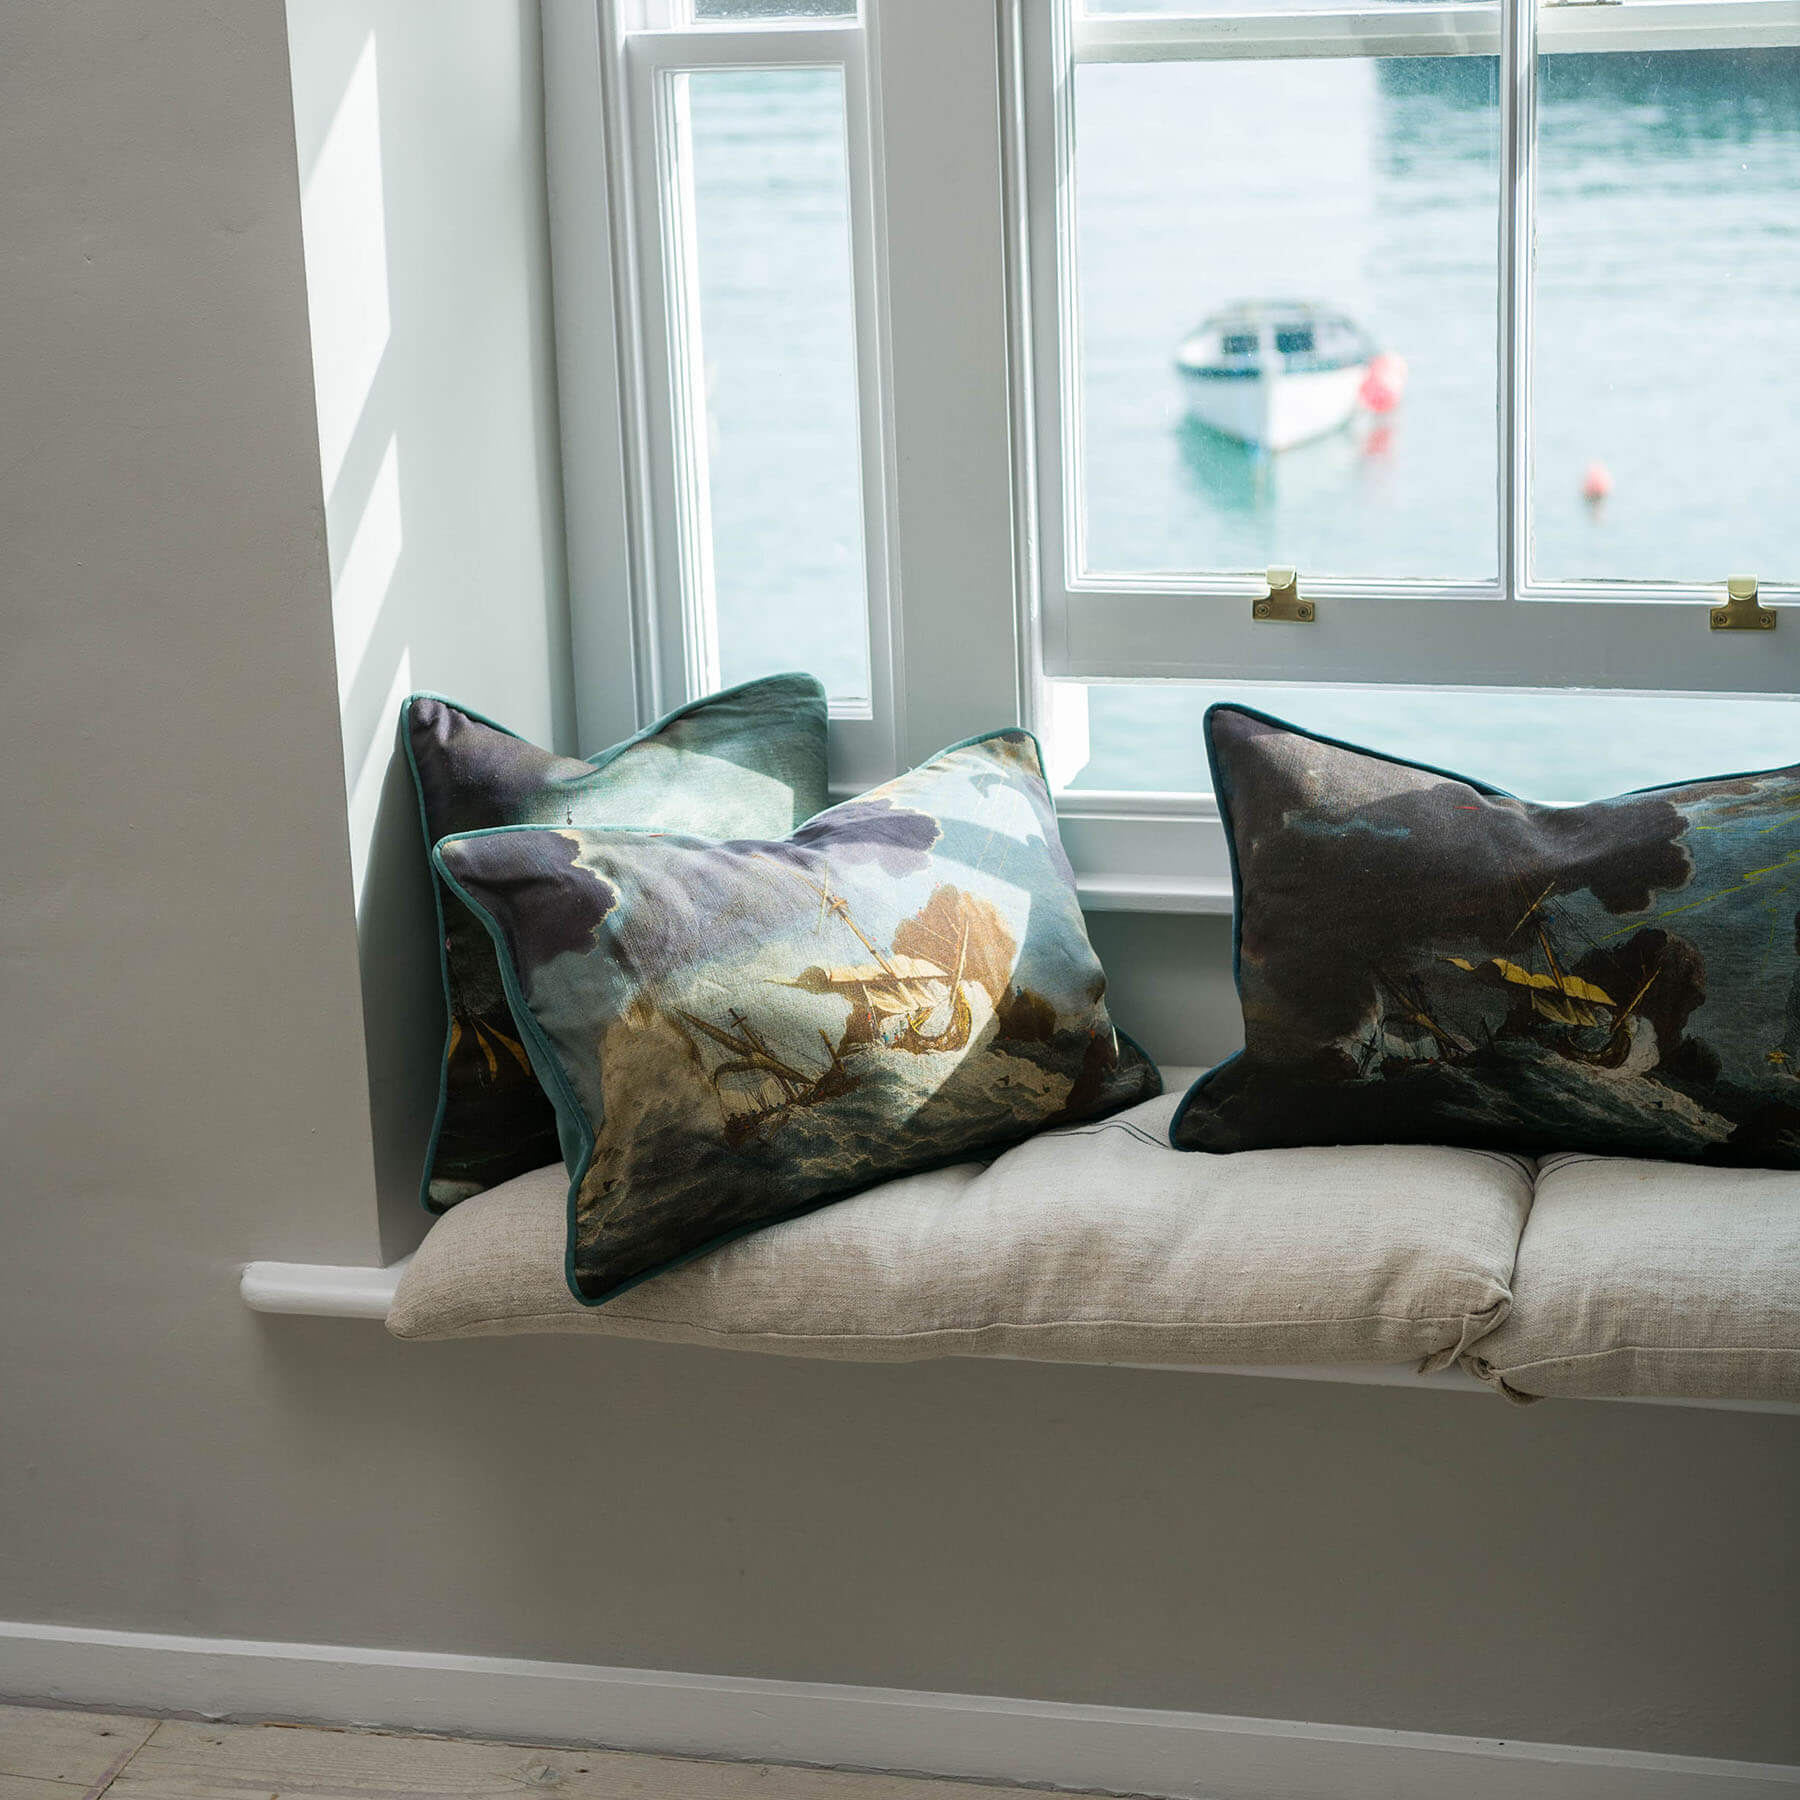 Shipwreck Night Rectangle Cushion Cover showing a couple of ships in heavy stormy,thundery weather.It is placed with other shipwreck cushions on a window seat,out of the window you can see the sea and a small bost.